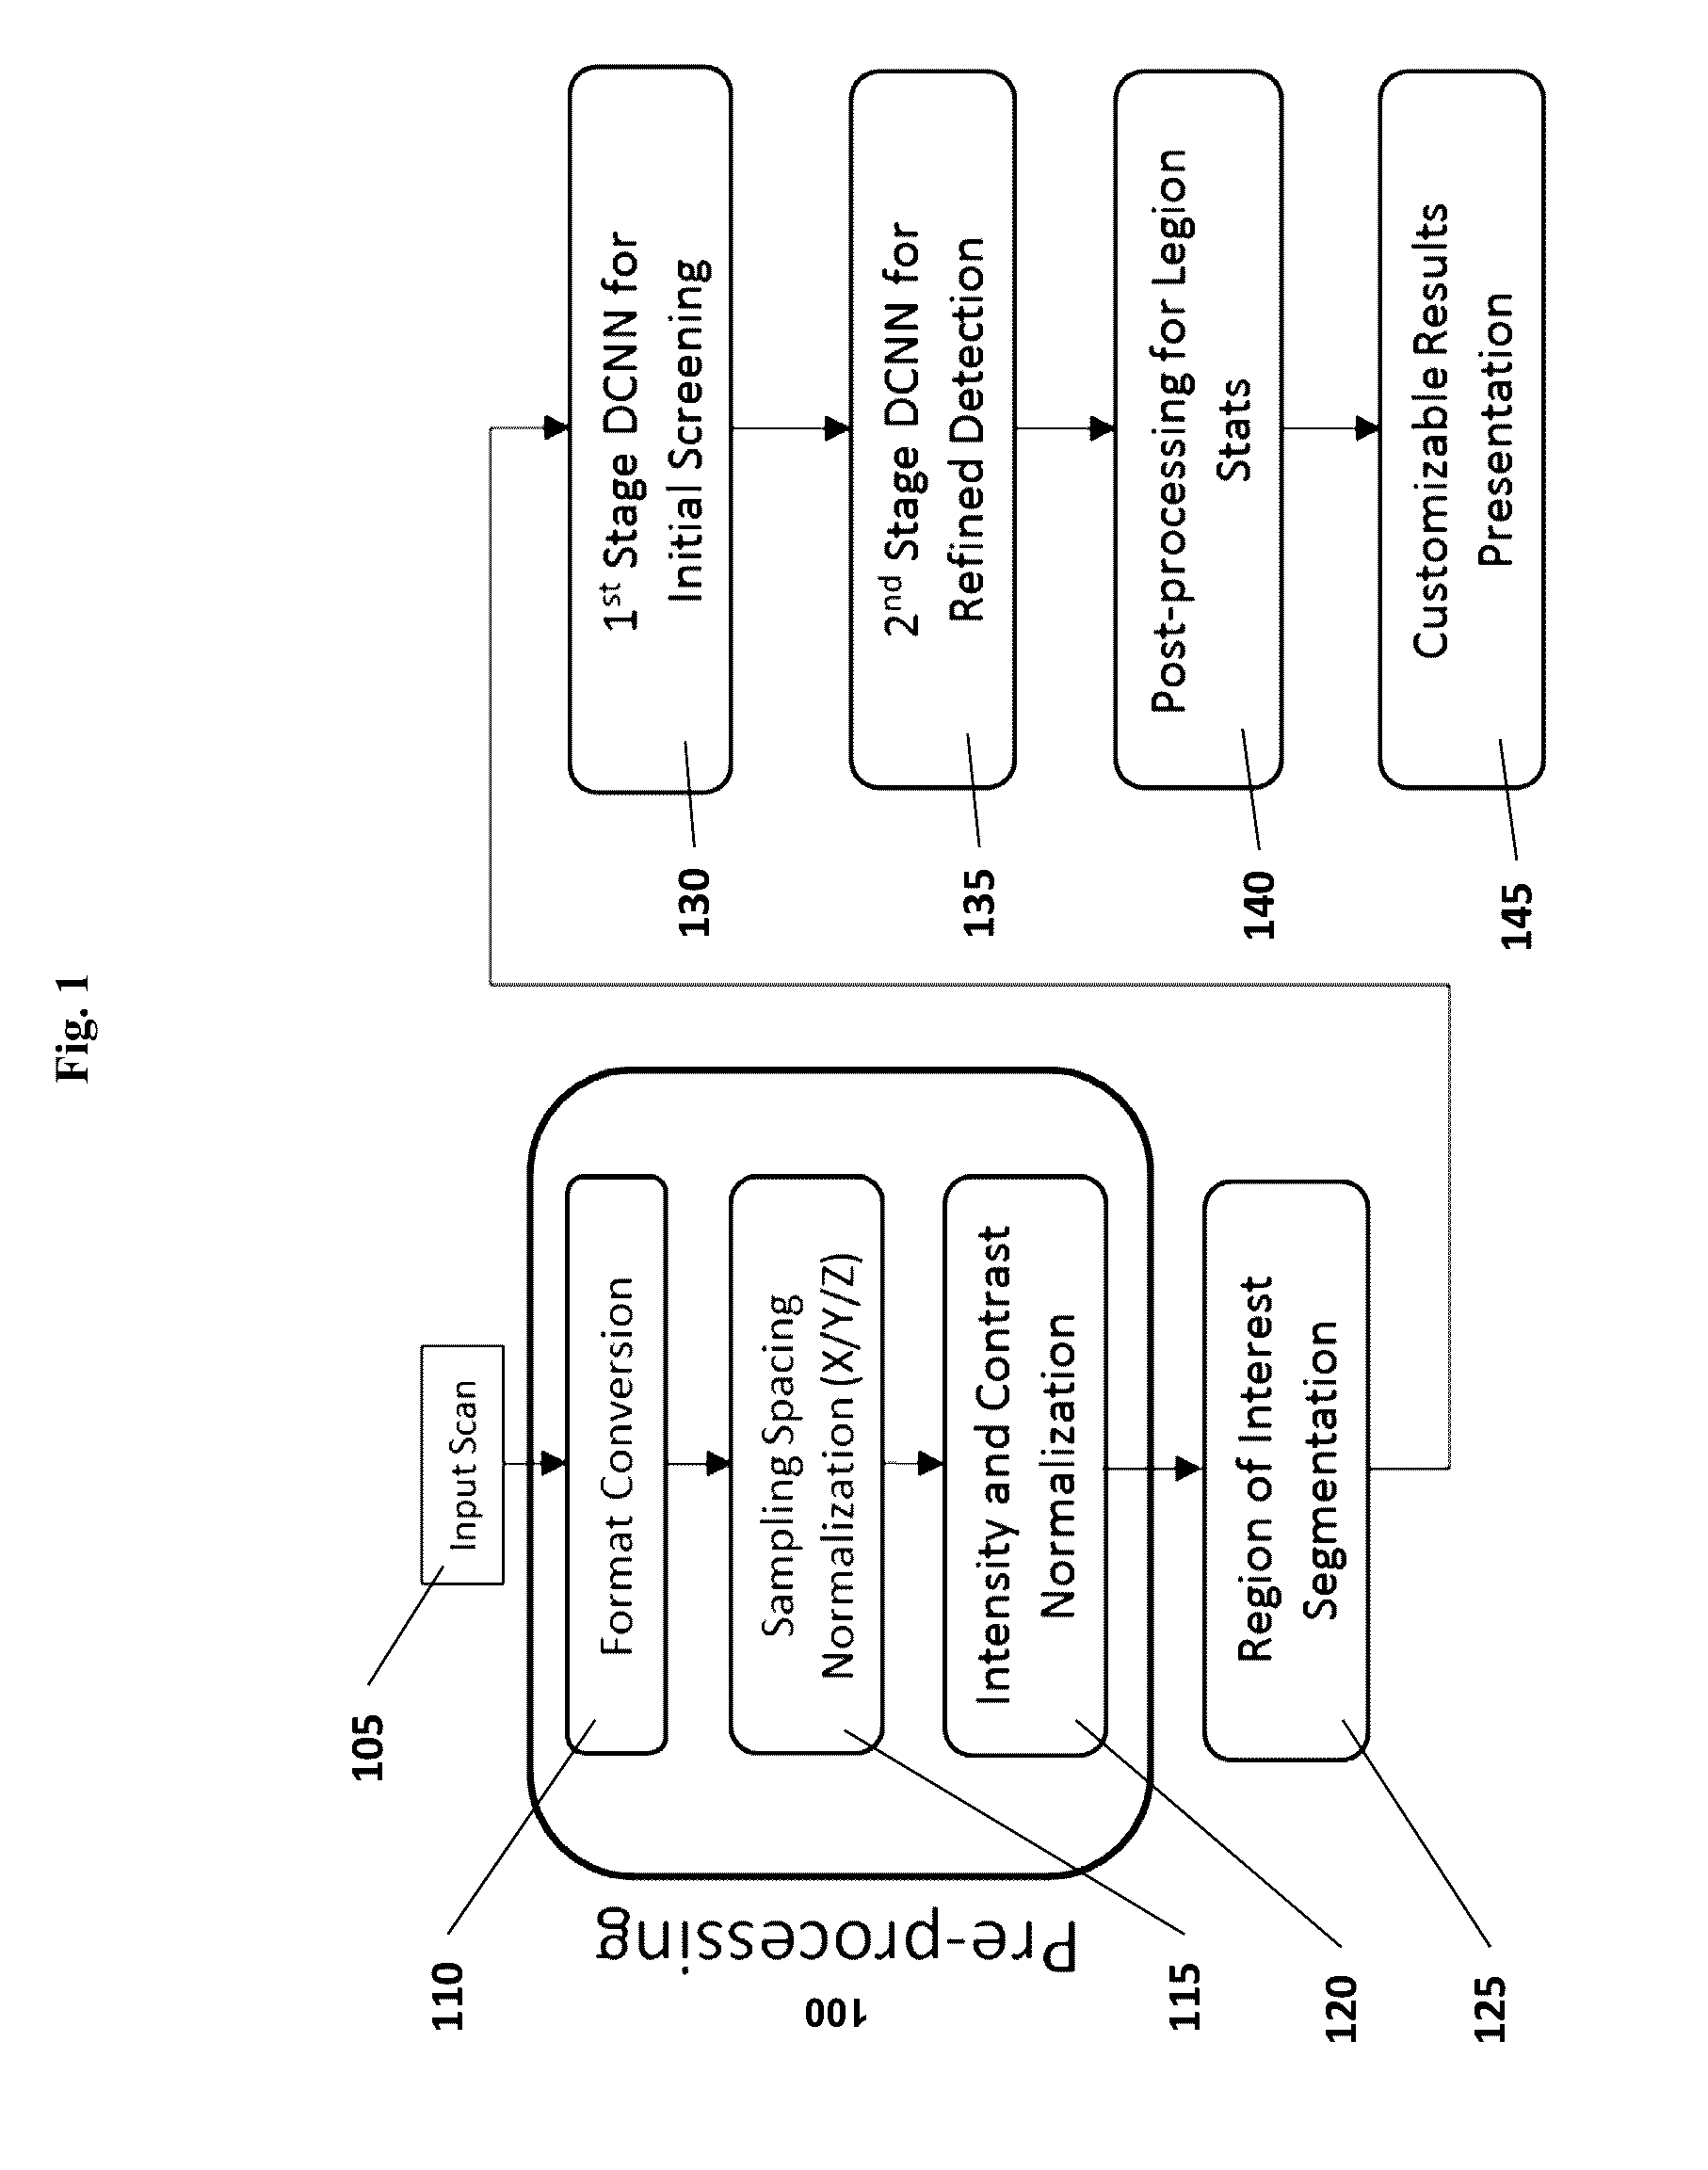 Computer-aided diagnosis system for medical images using deep convolutional neural networks